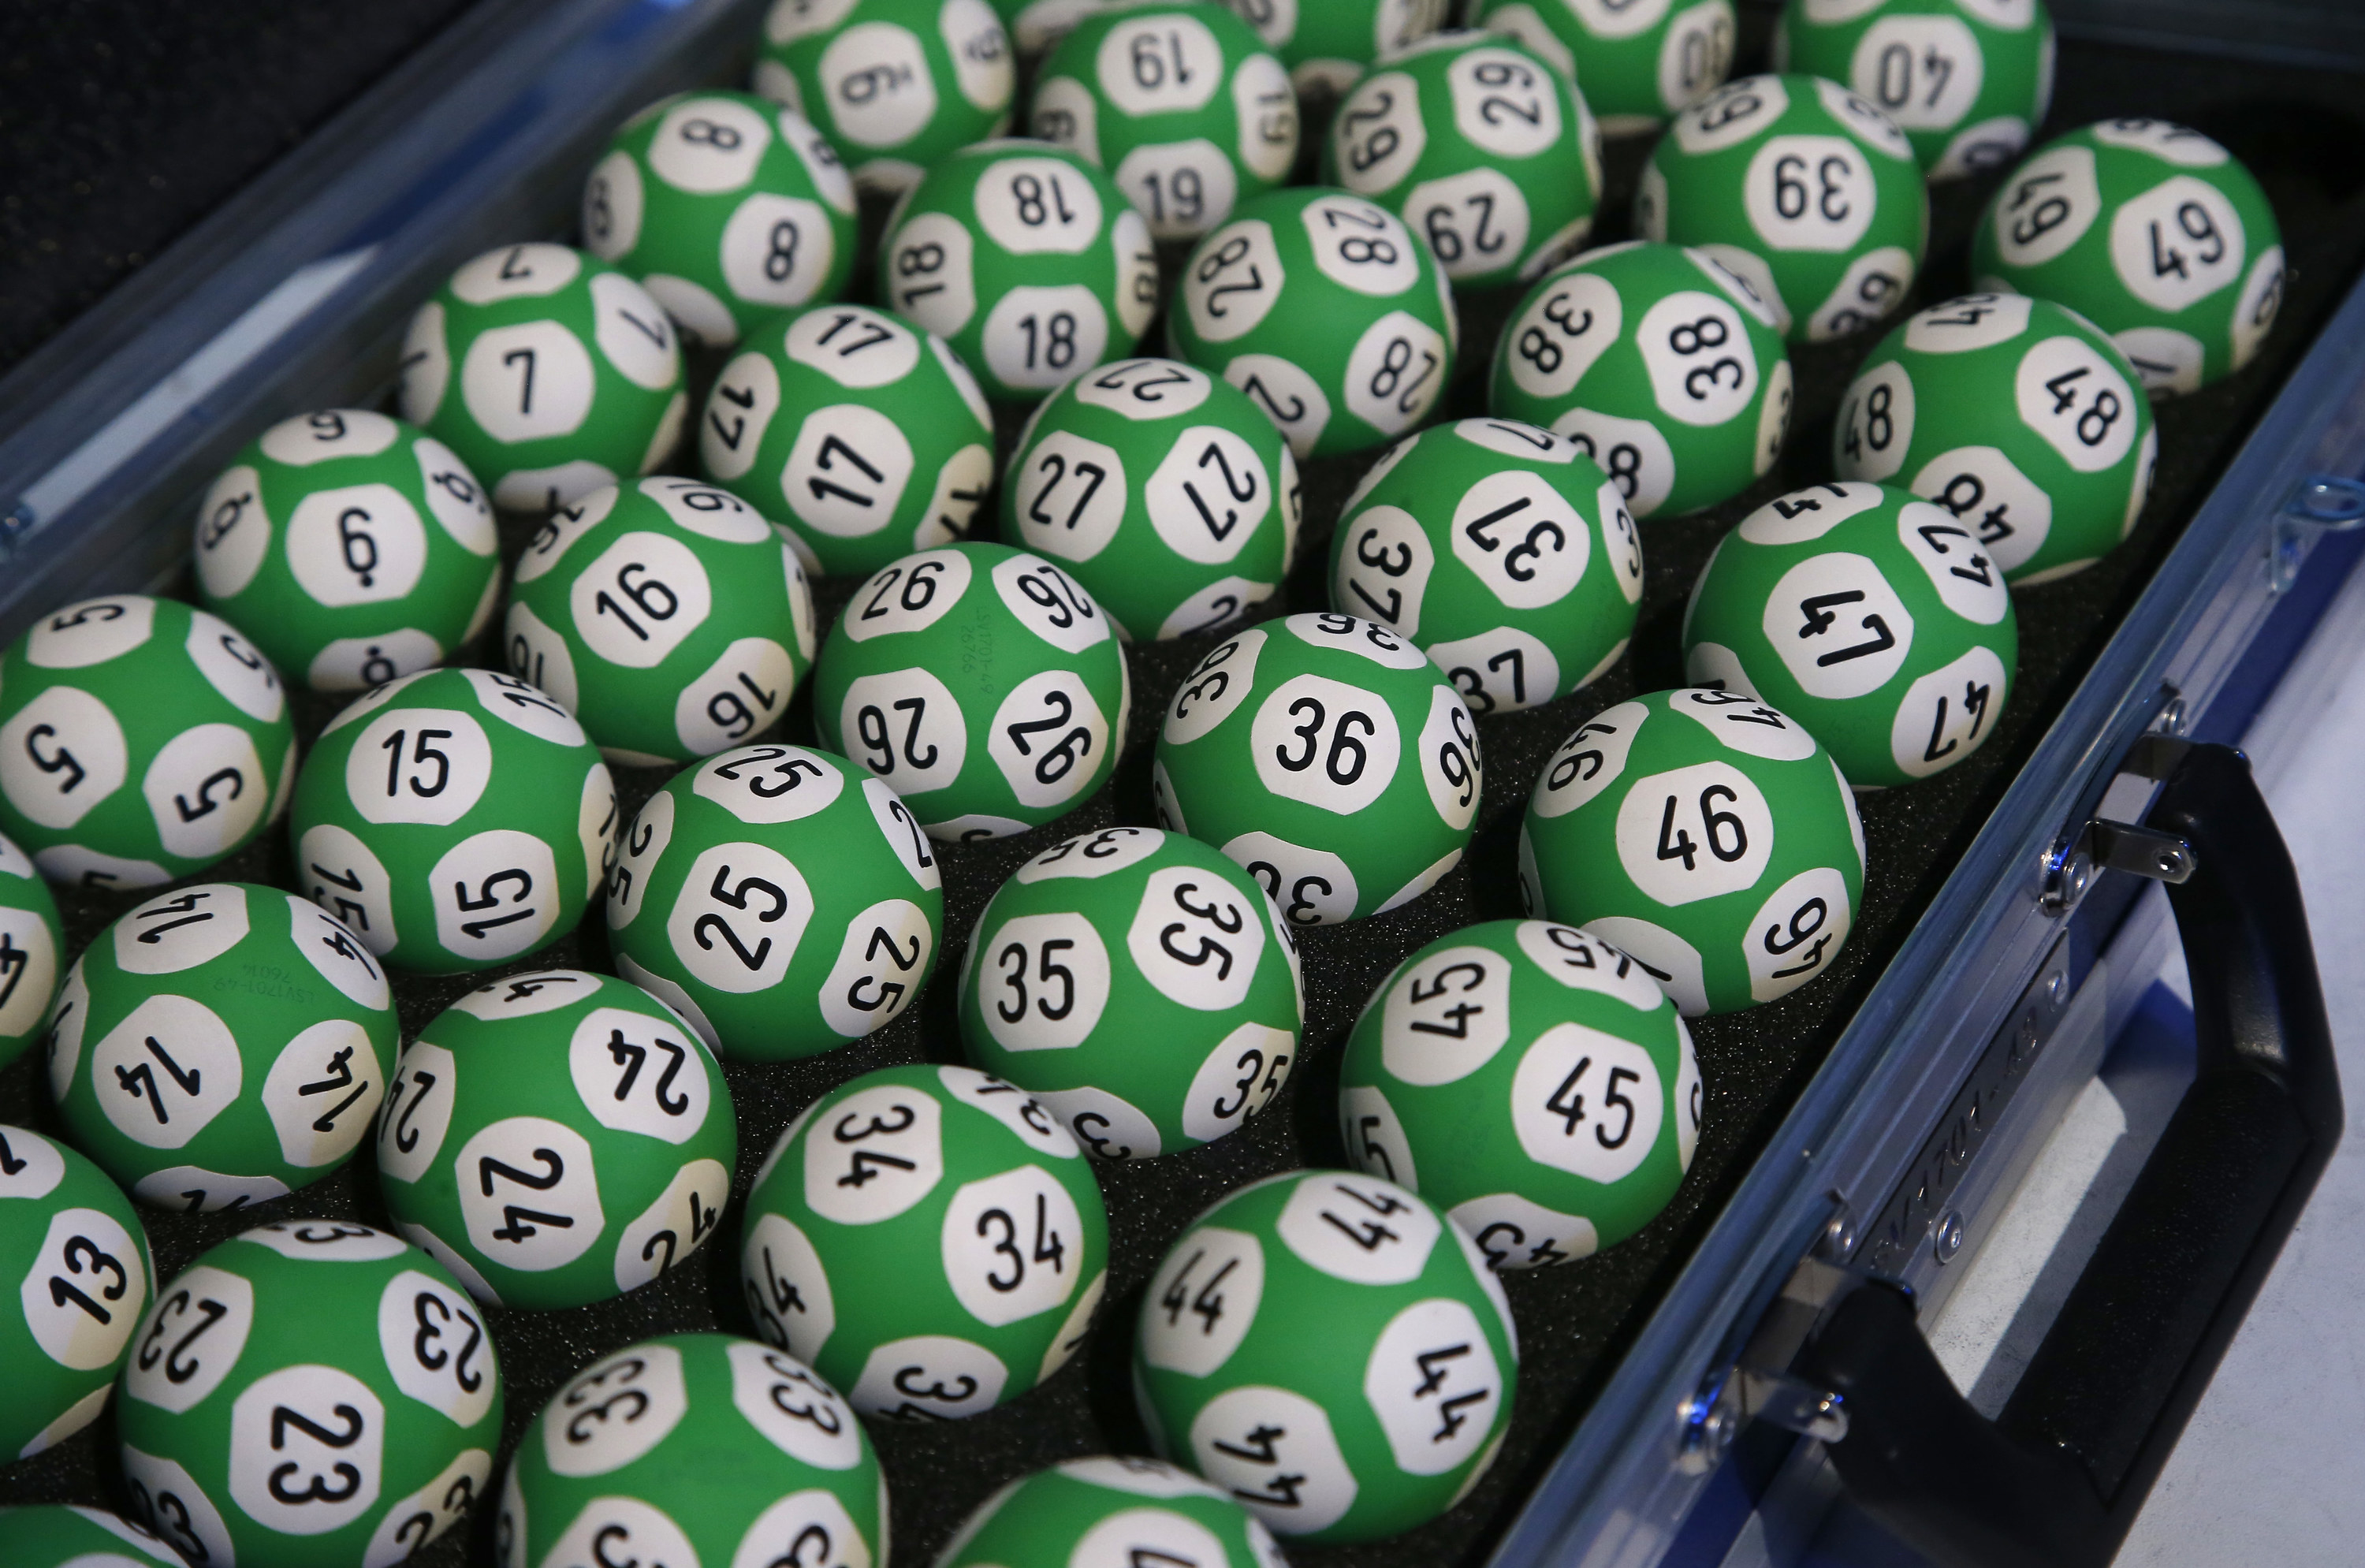 Lots of lottery balls with different numbers inside a suitcase